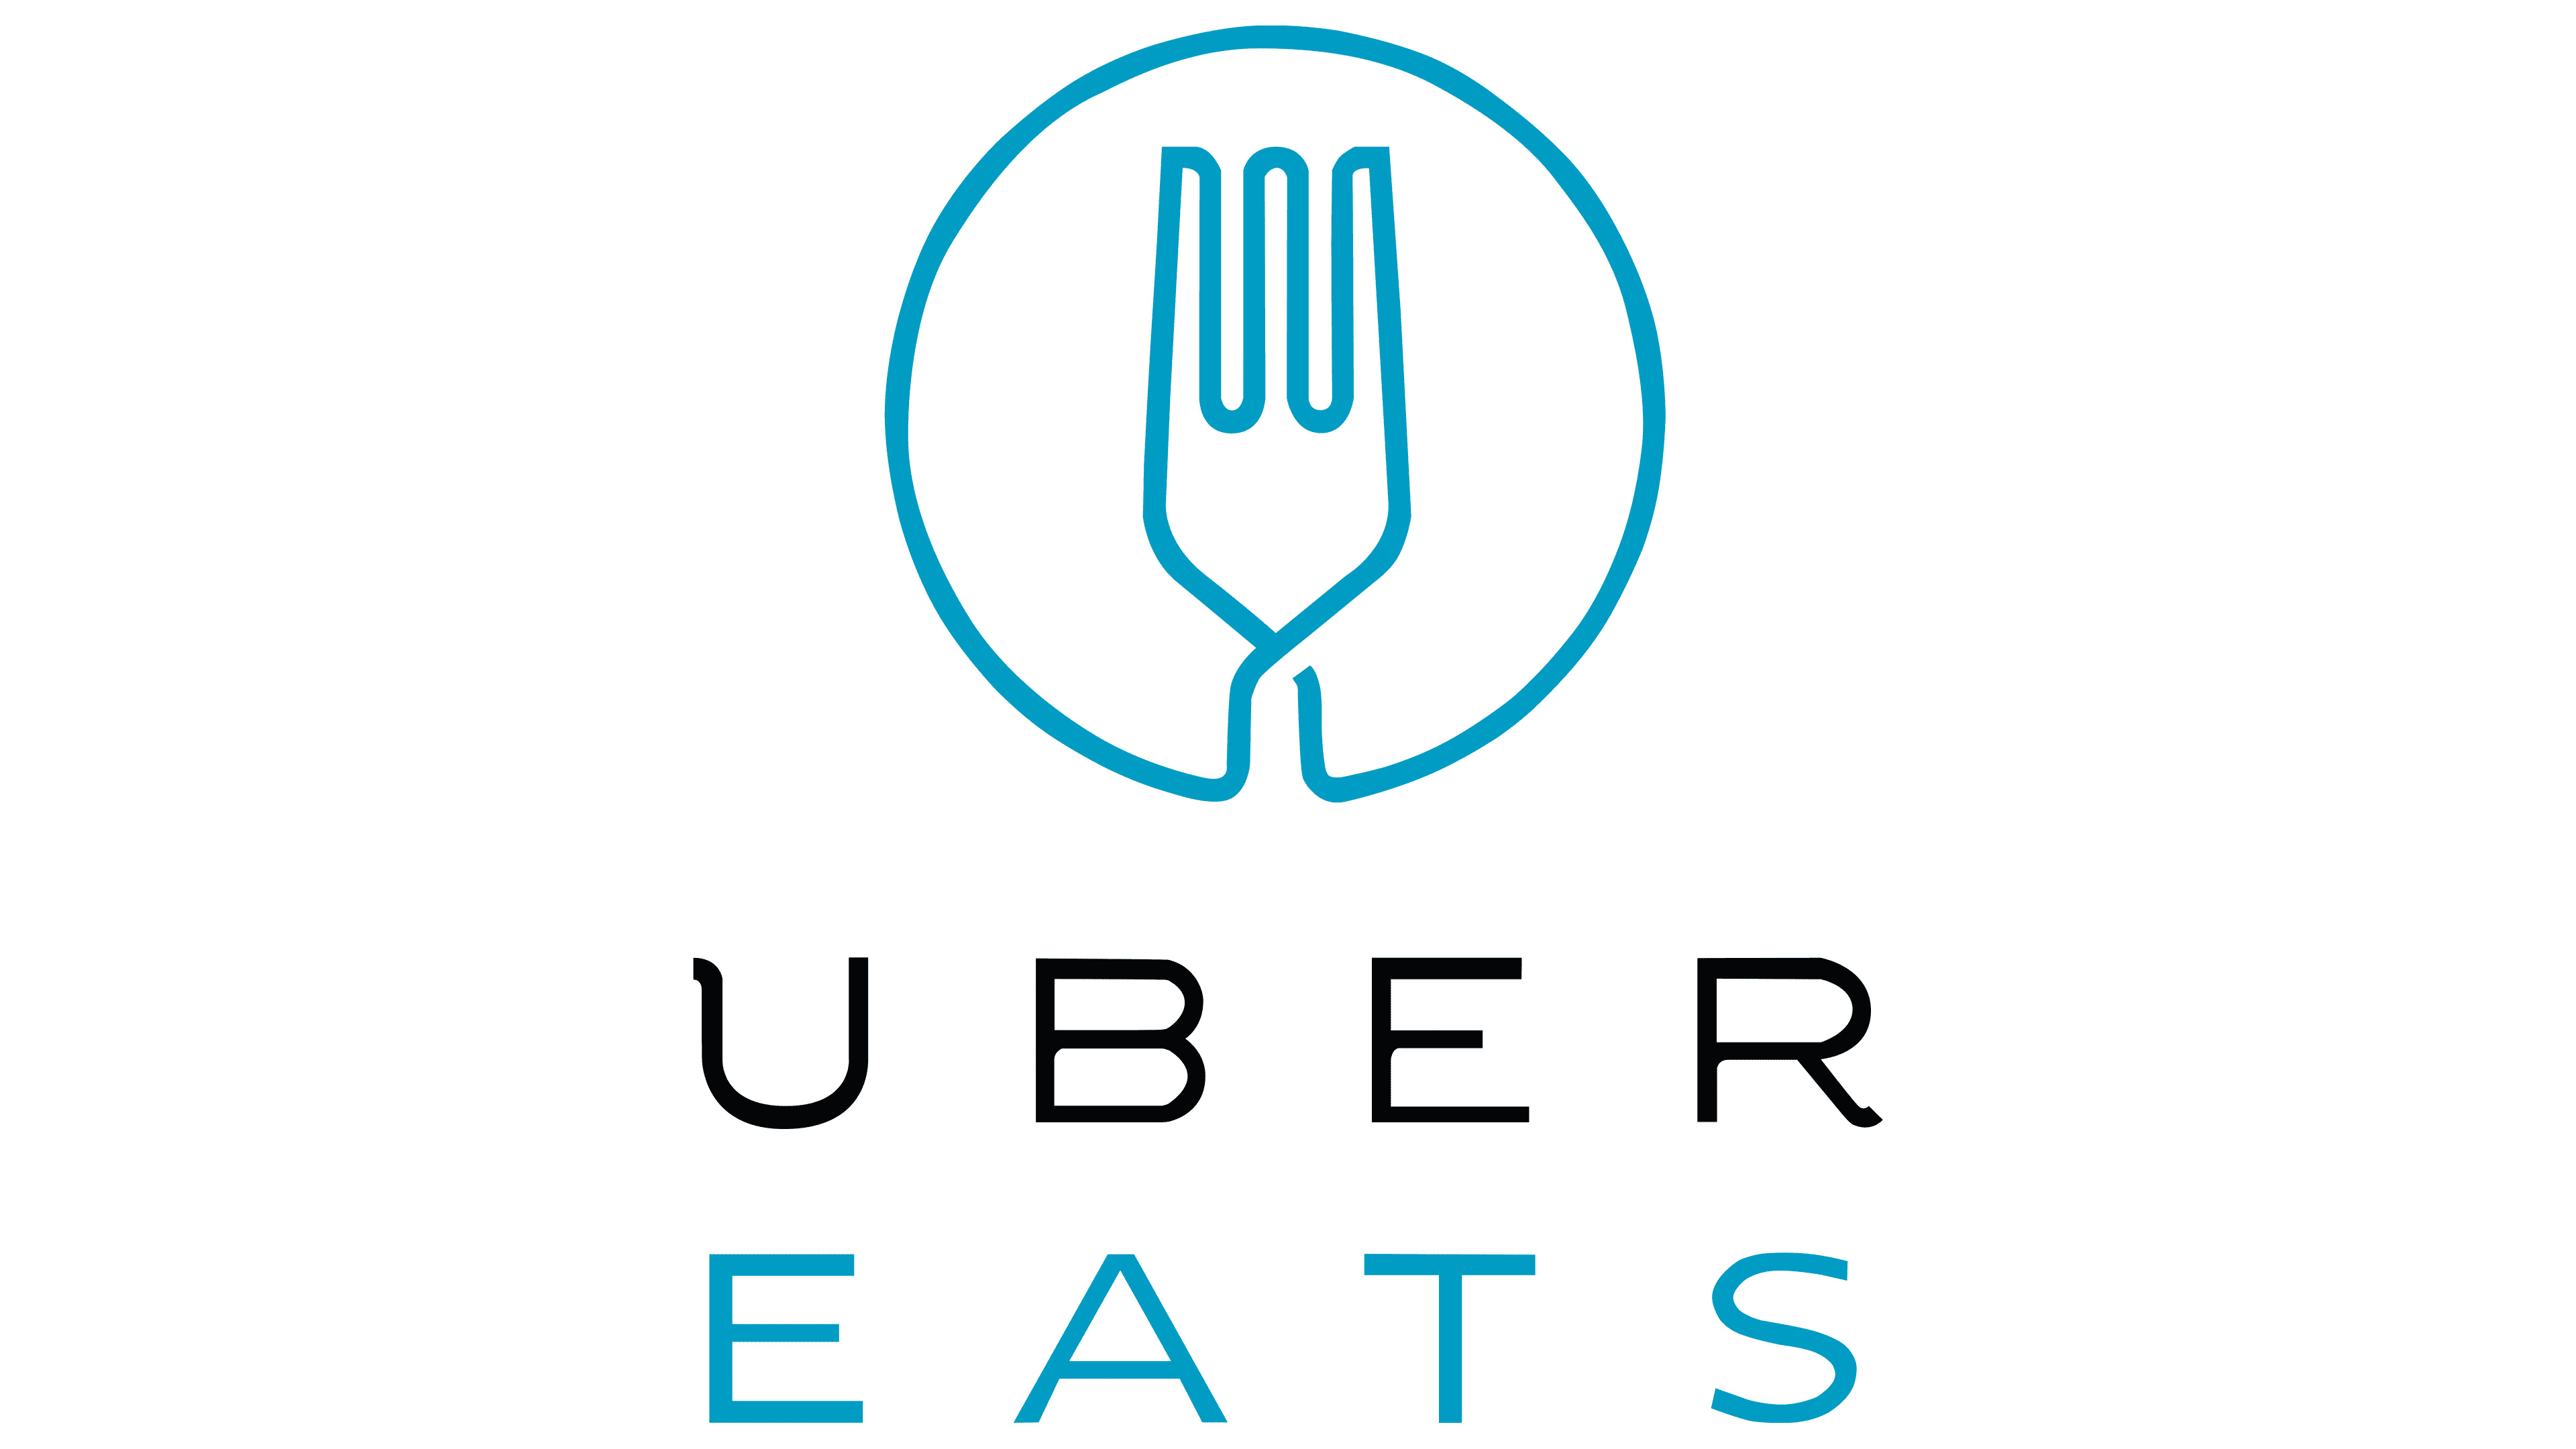 Uber: The easy way to get the food you love delivered, Logo used in 2015-2016. 3840x2160 4K Wallpaper.